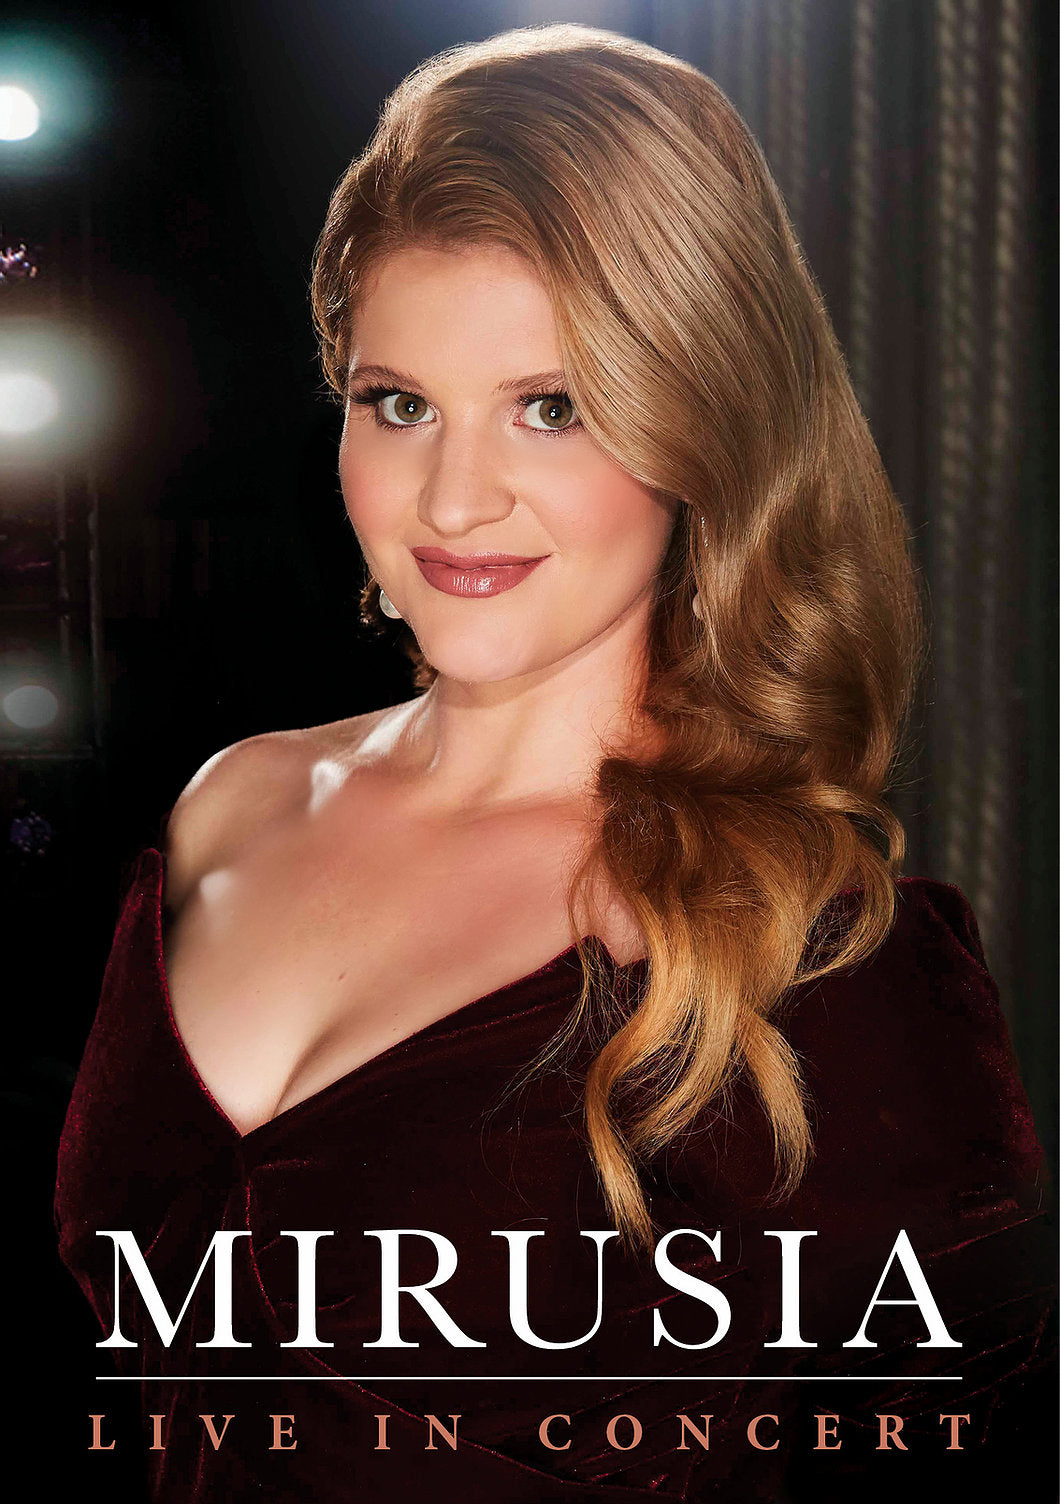 MIRUSIA - Live In Concert (SIGNED DVD)